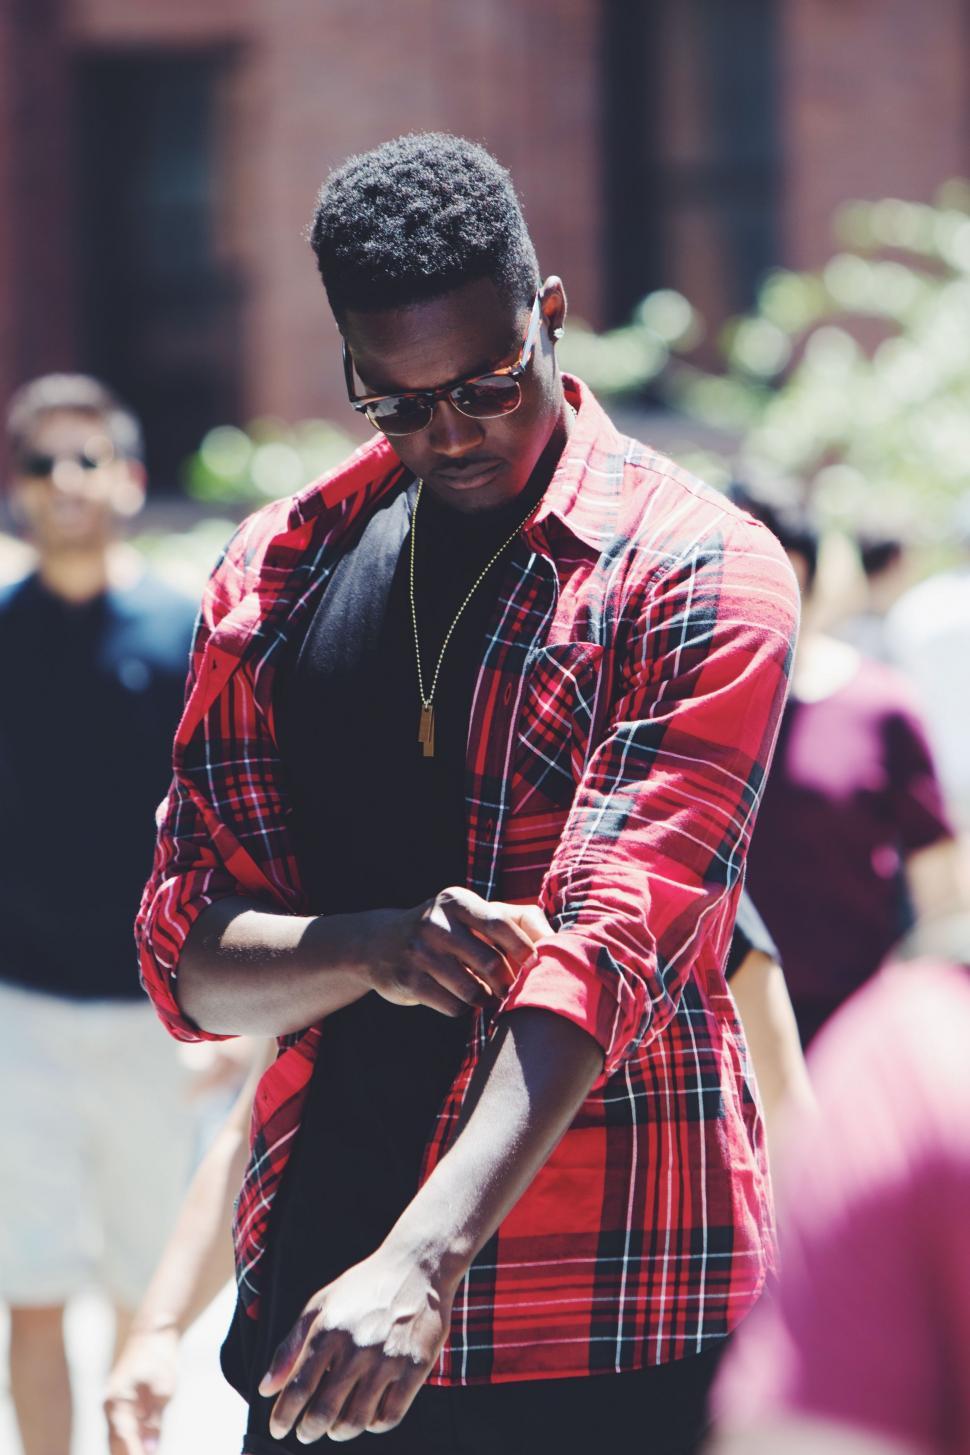 Free Image of Man in Red and Black Checkered Shirt Looking at Cell Phone 